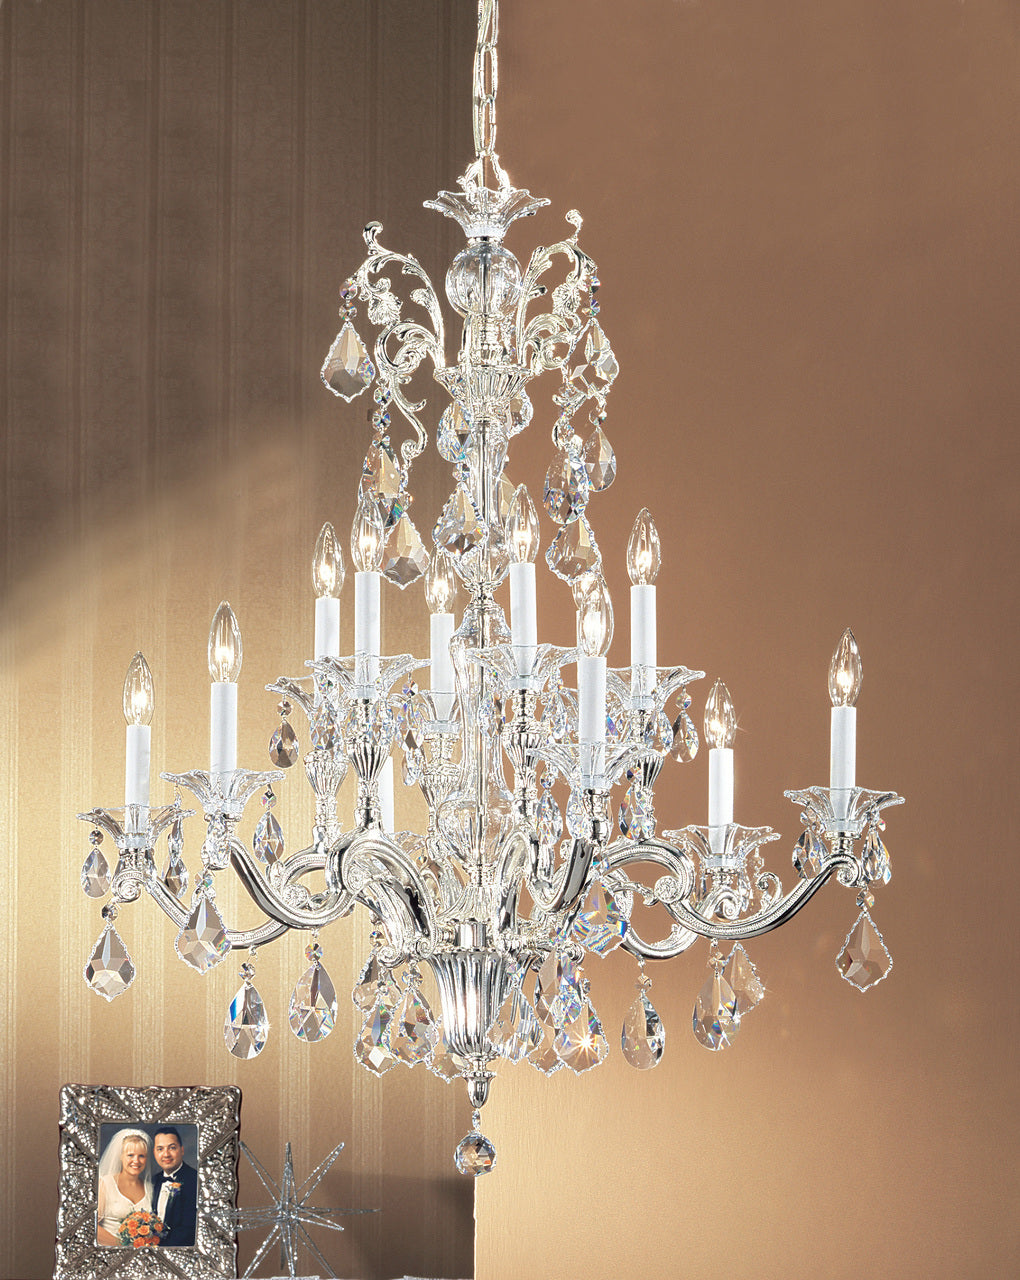 Classic Lighting 57112 SP IRA Via Firenze Crystal Chandelier in Silver (Imported from Spain)